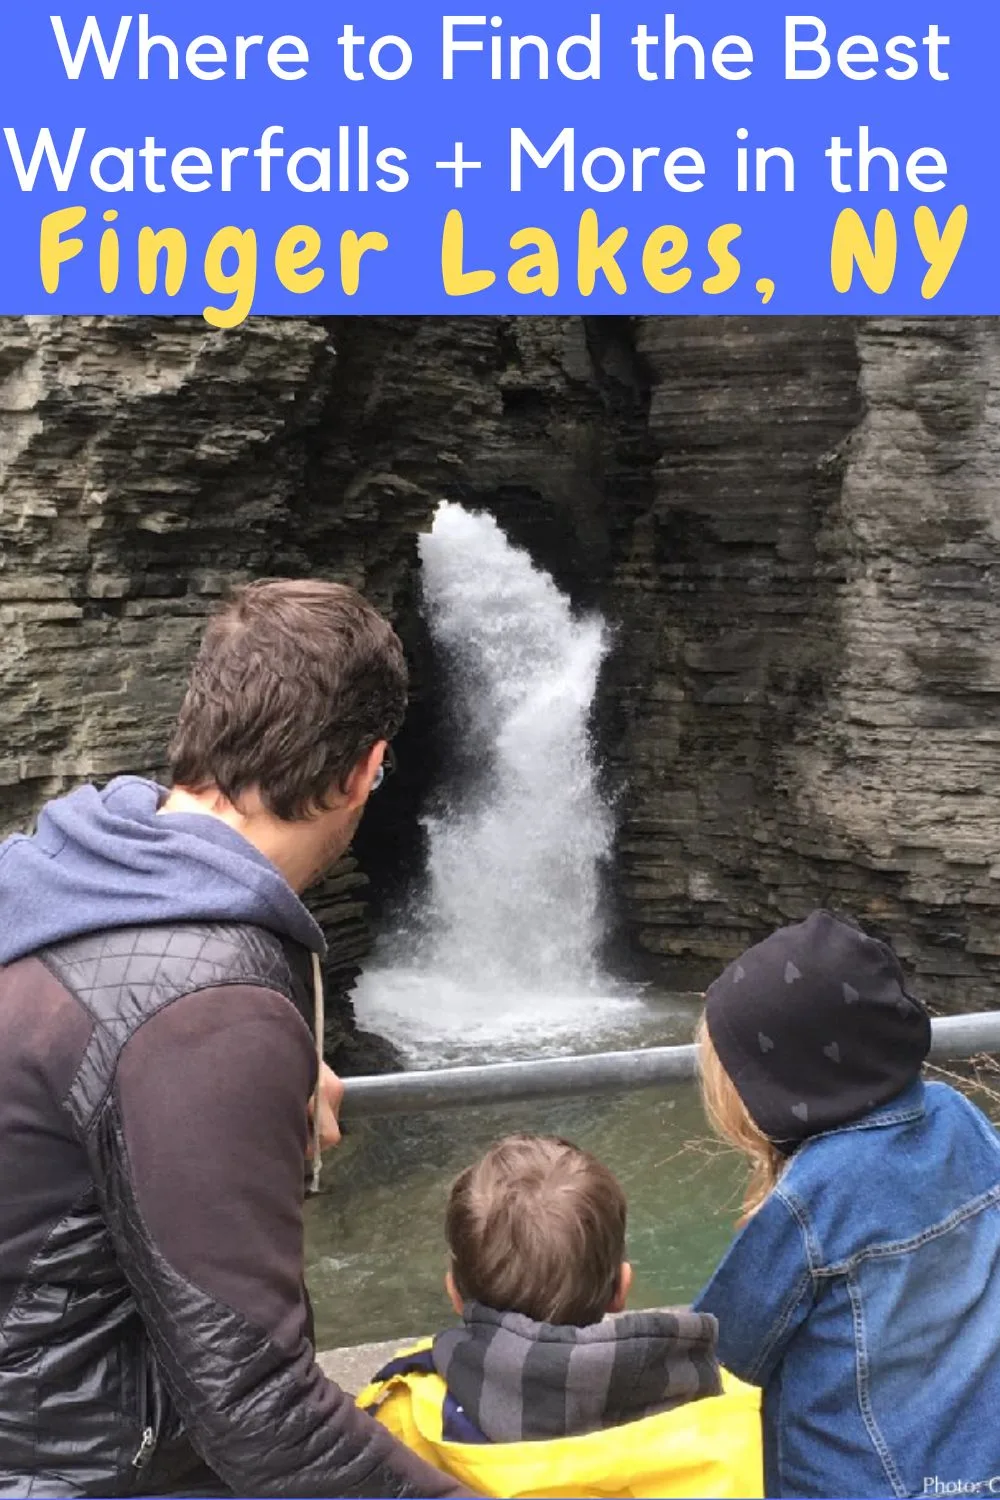 we tell you where to find the best waterfalls, ice cream, museums, beer and even where to stay with kids in the finger lakes region of new york.